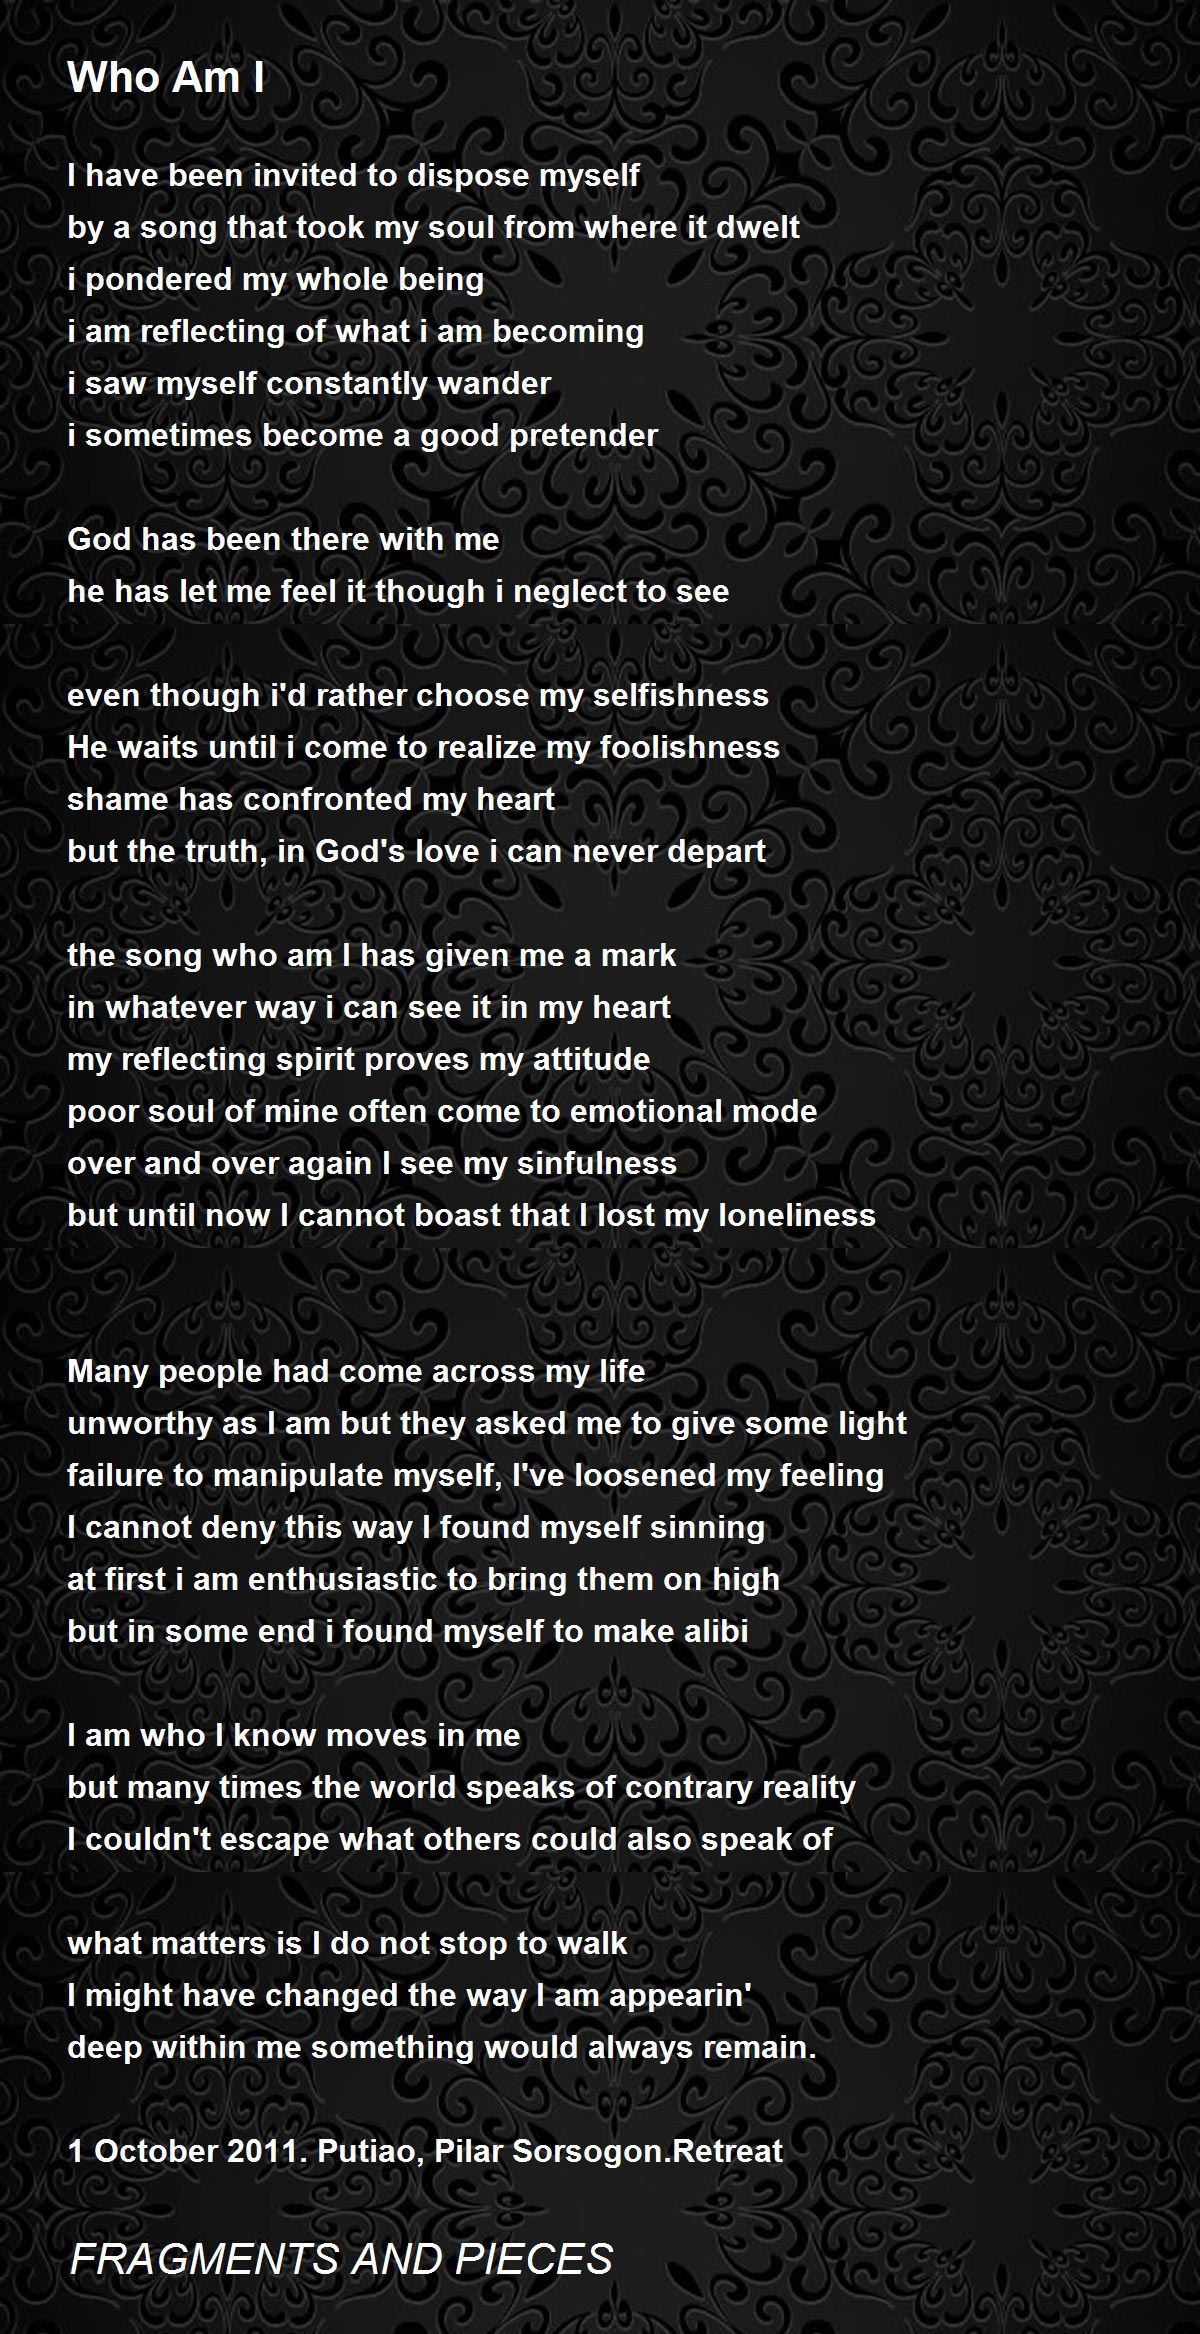 Who Am I - Who Am I Poem by FRAGMENTS AND PIECES